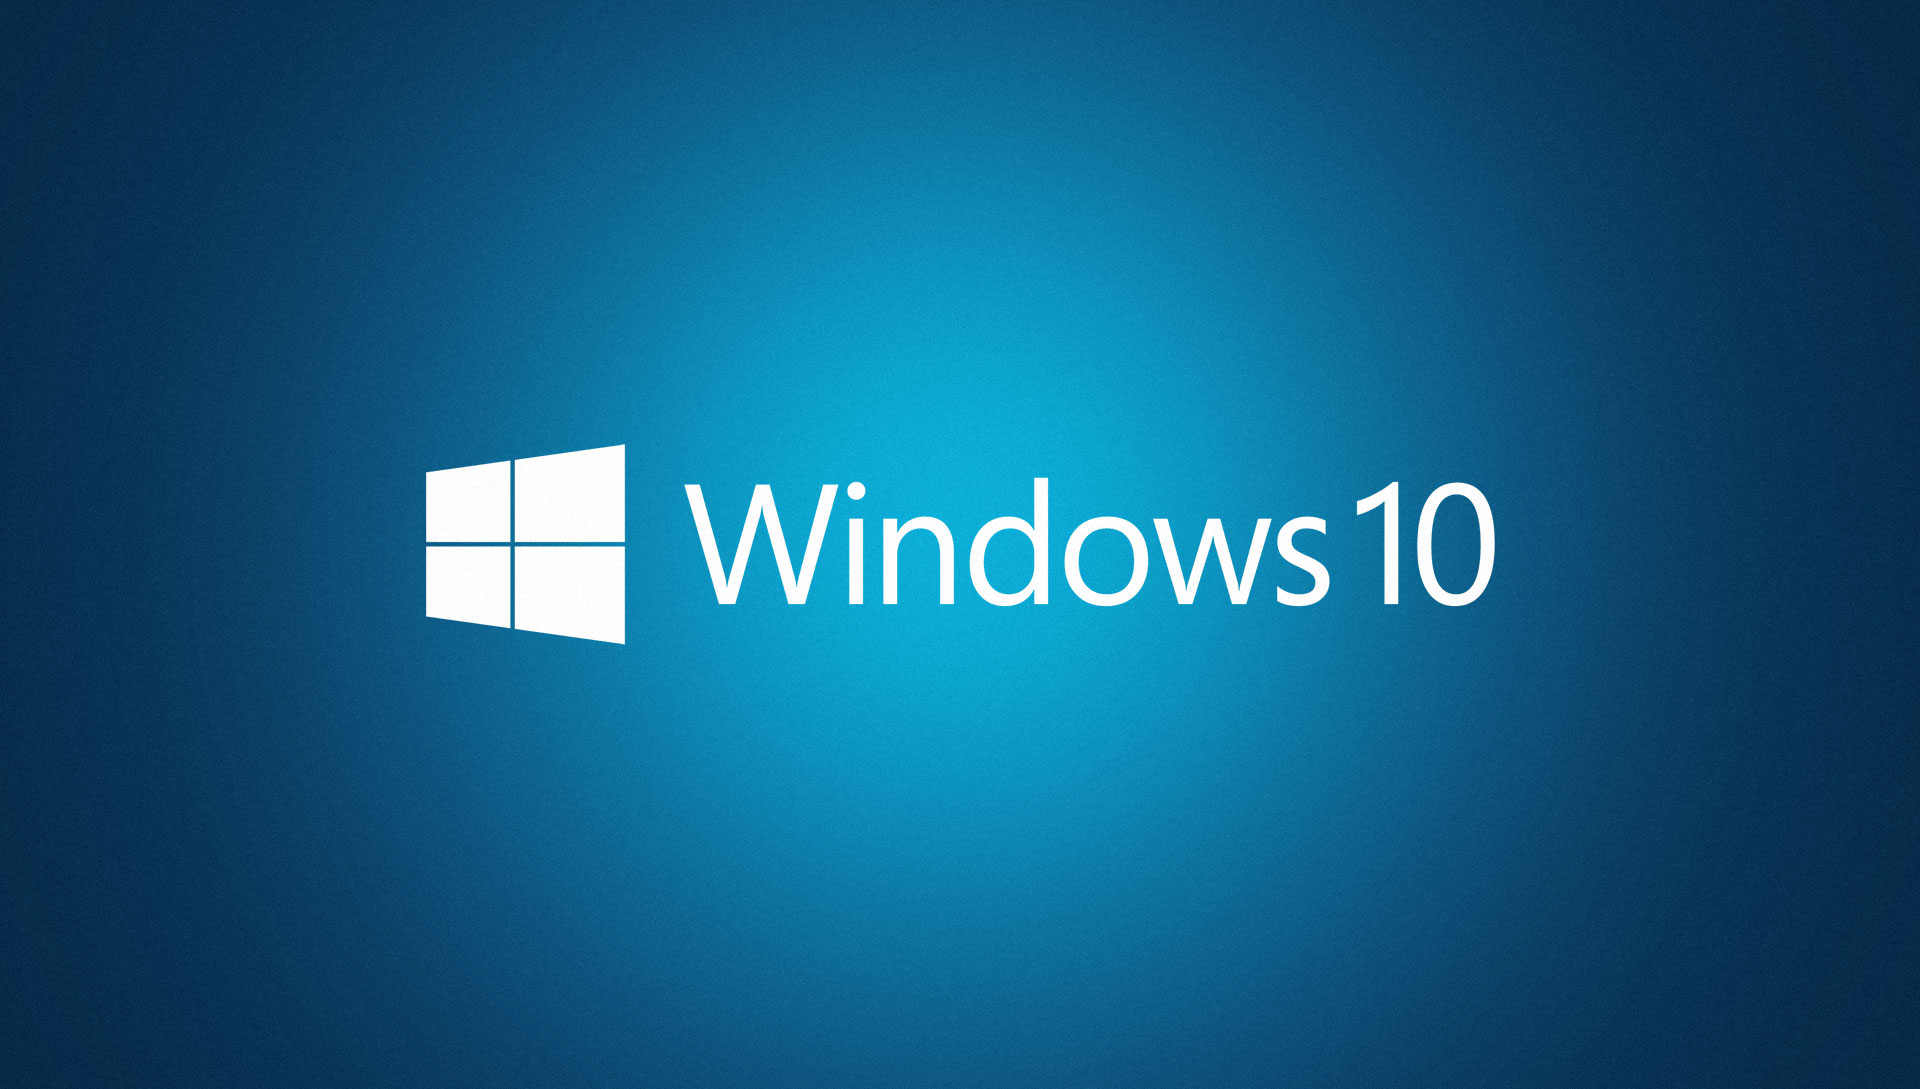 Watch the Windows media briefing live webcast on Wednesday The